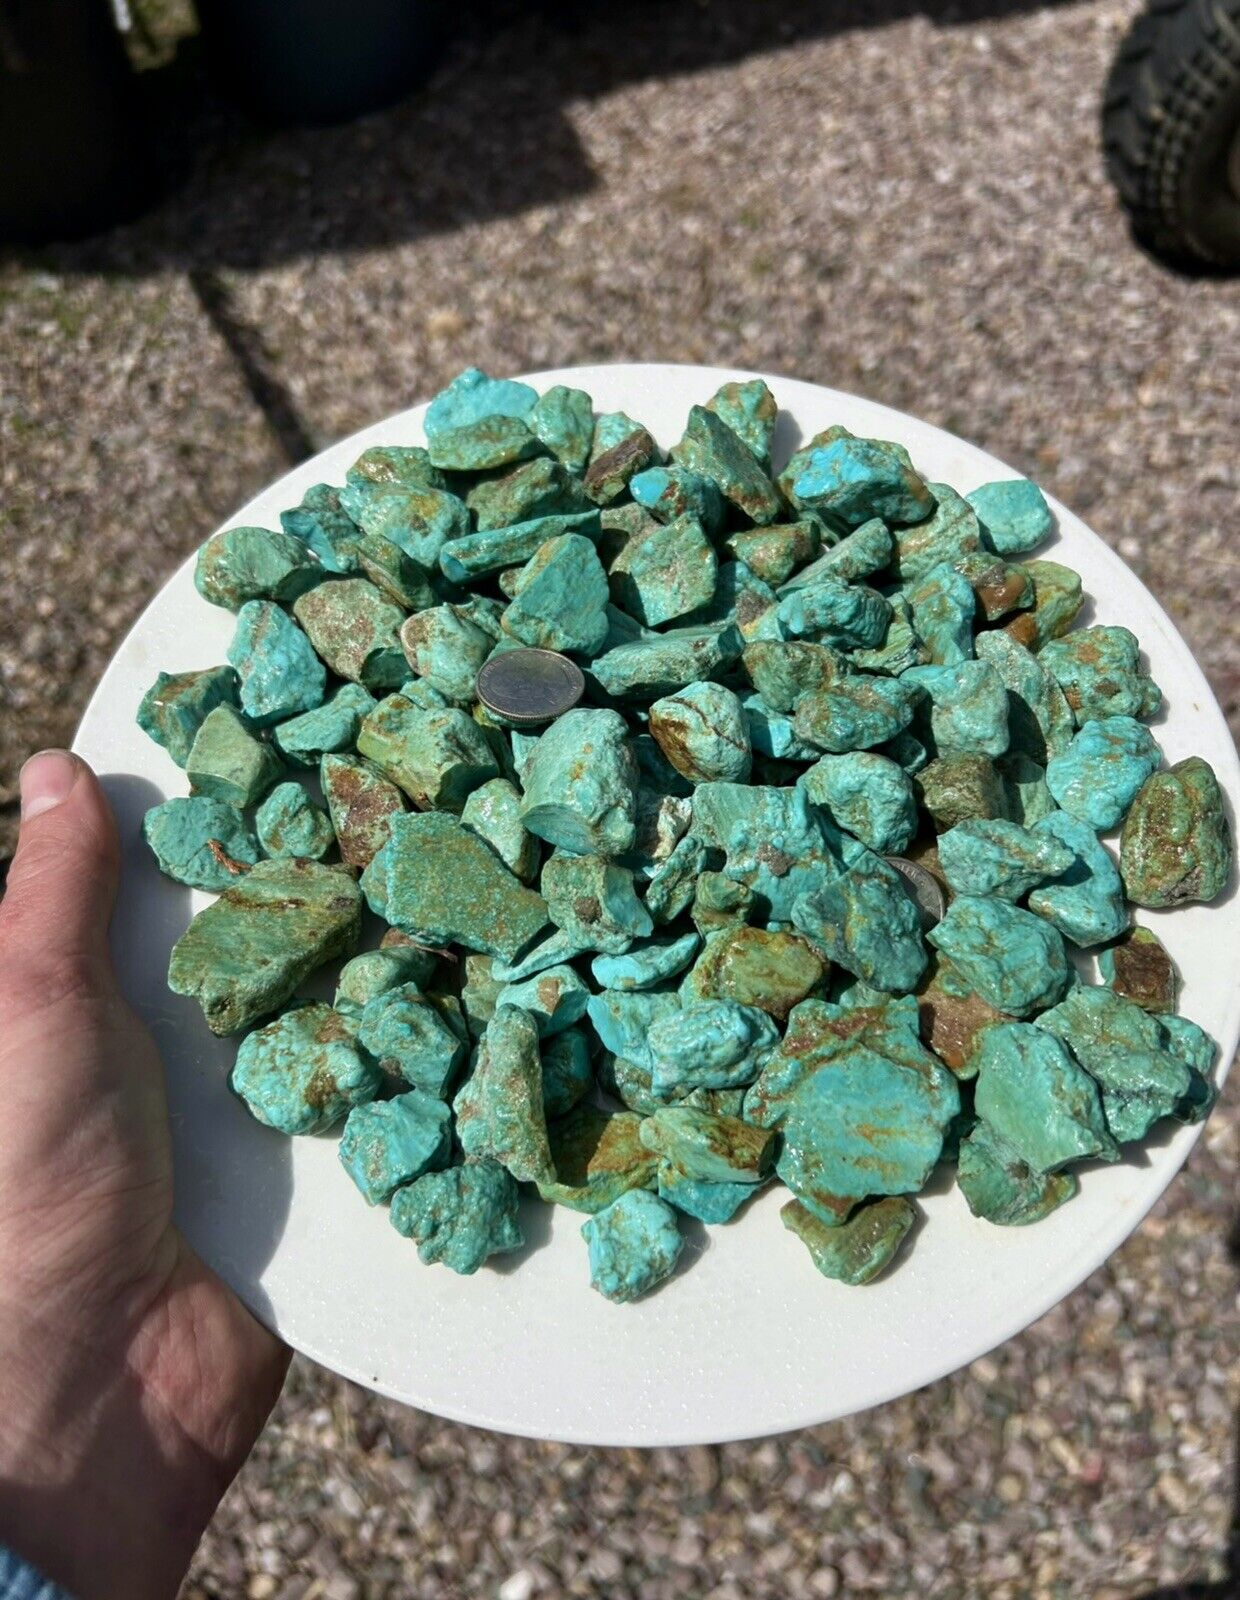 1/4 LB of Turquoise Mountain. 115 grams of Classic Light Blue Genuine Turquoise